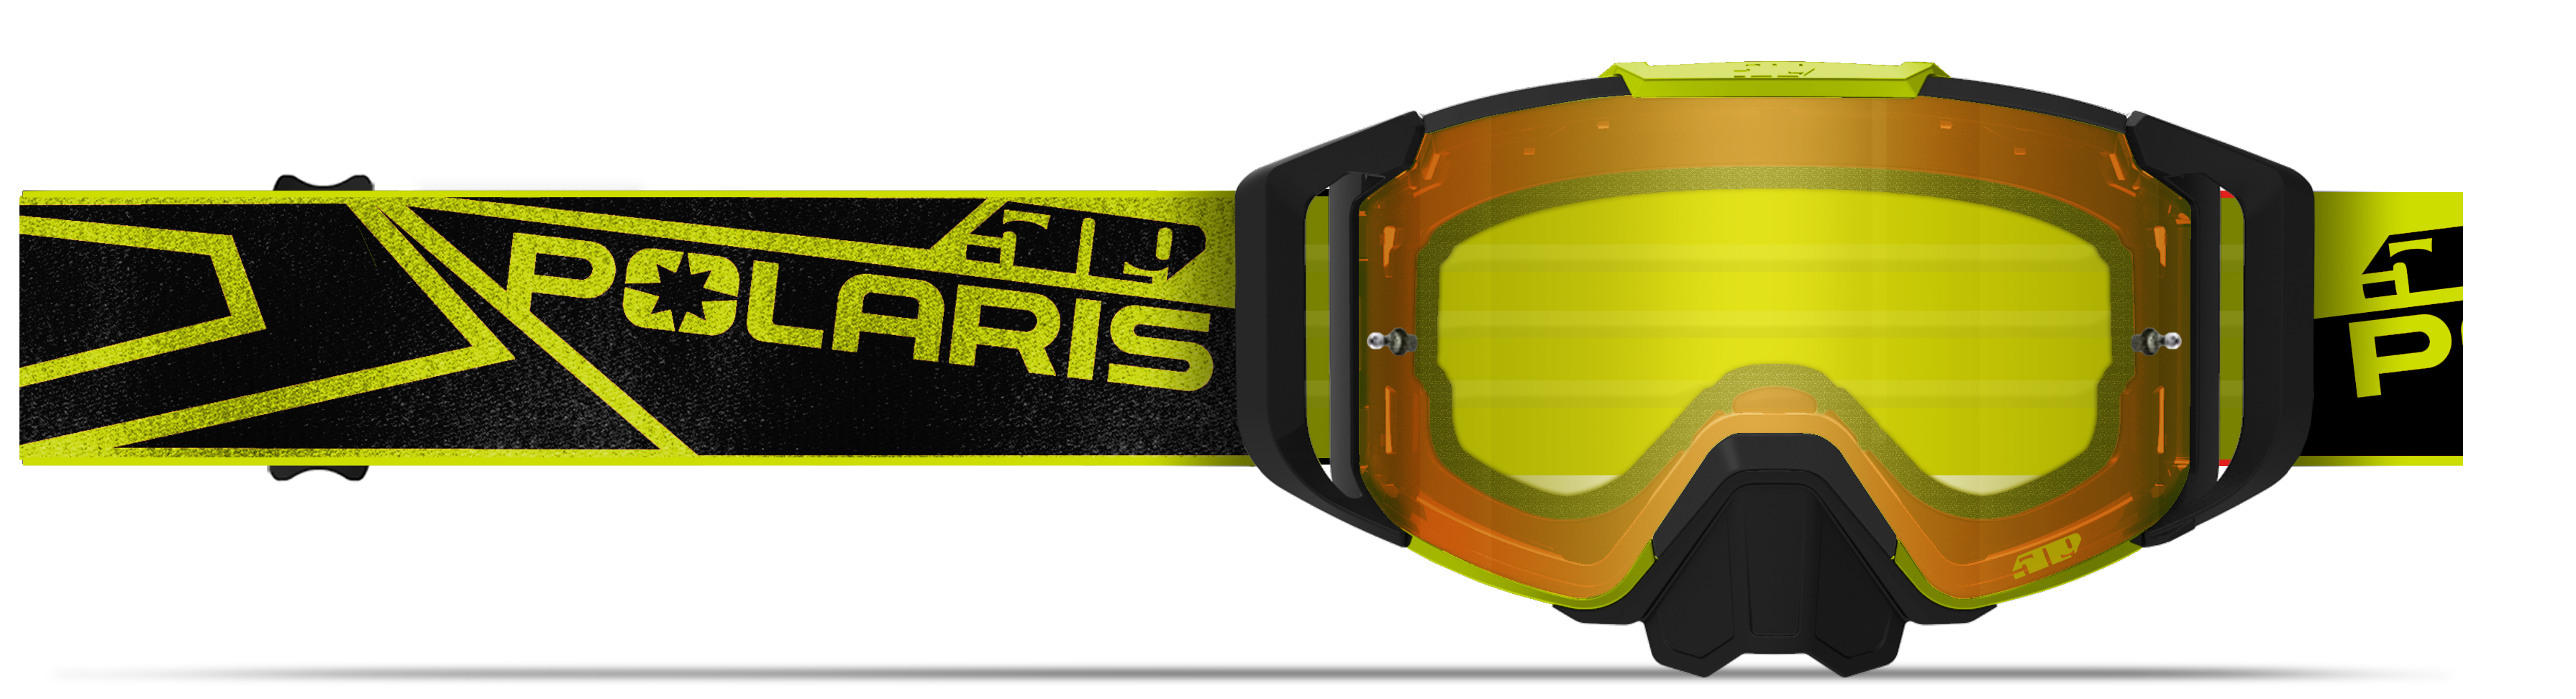 Polaris ATV 509® Dirt Adult Goggle Replacement Lenses with Quick-Change Technology 